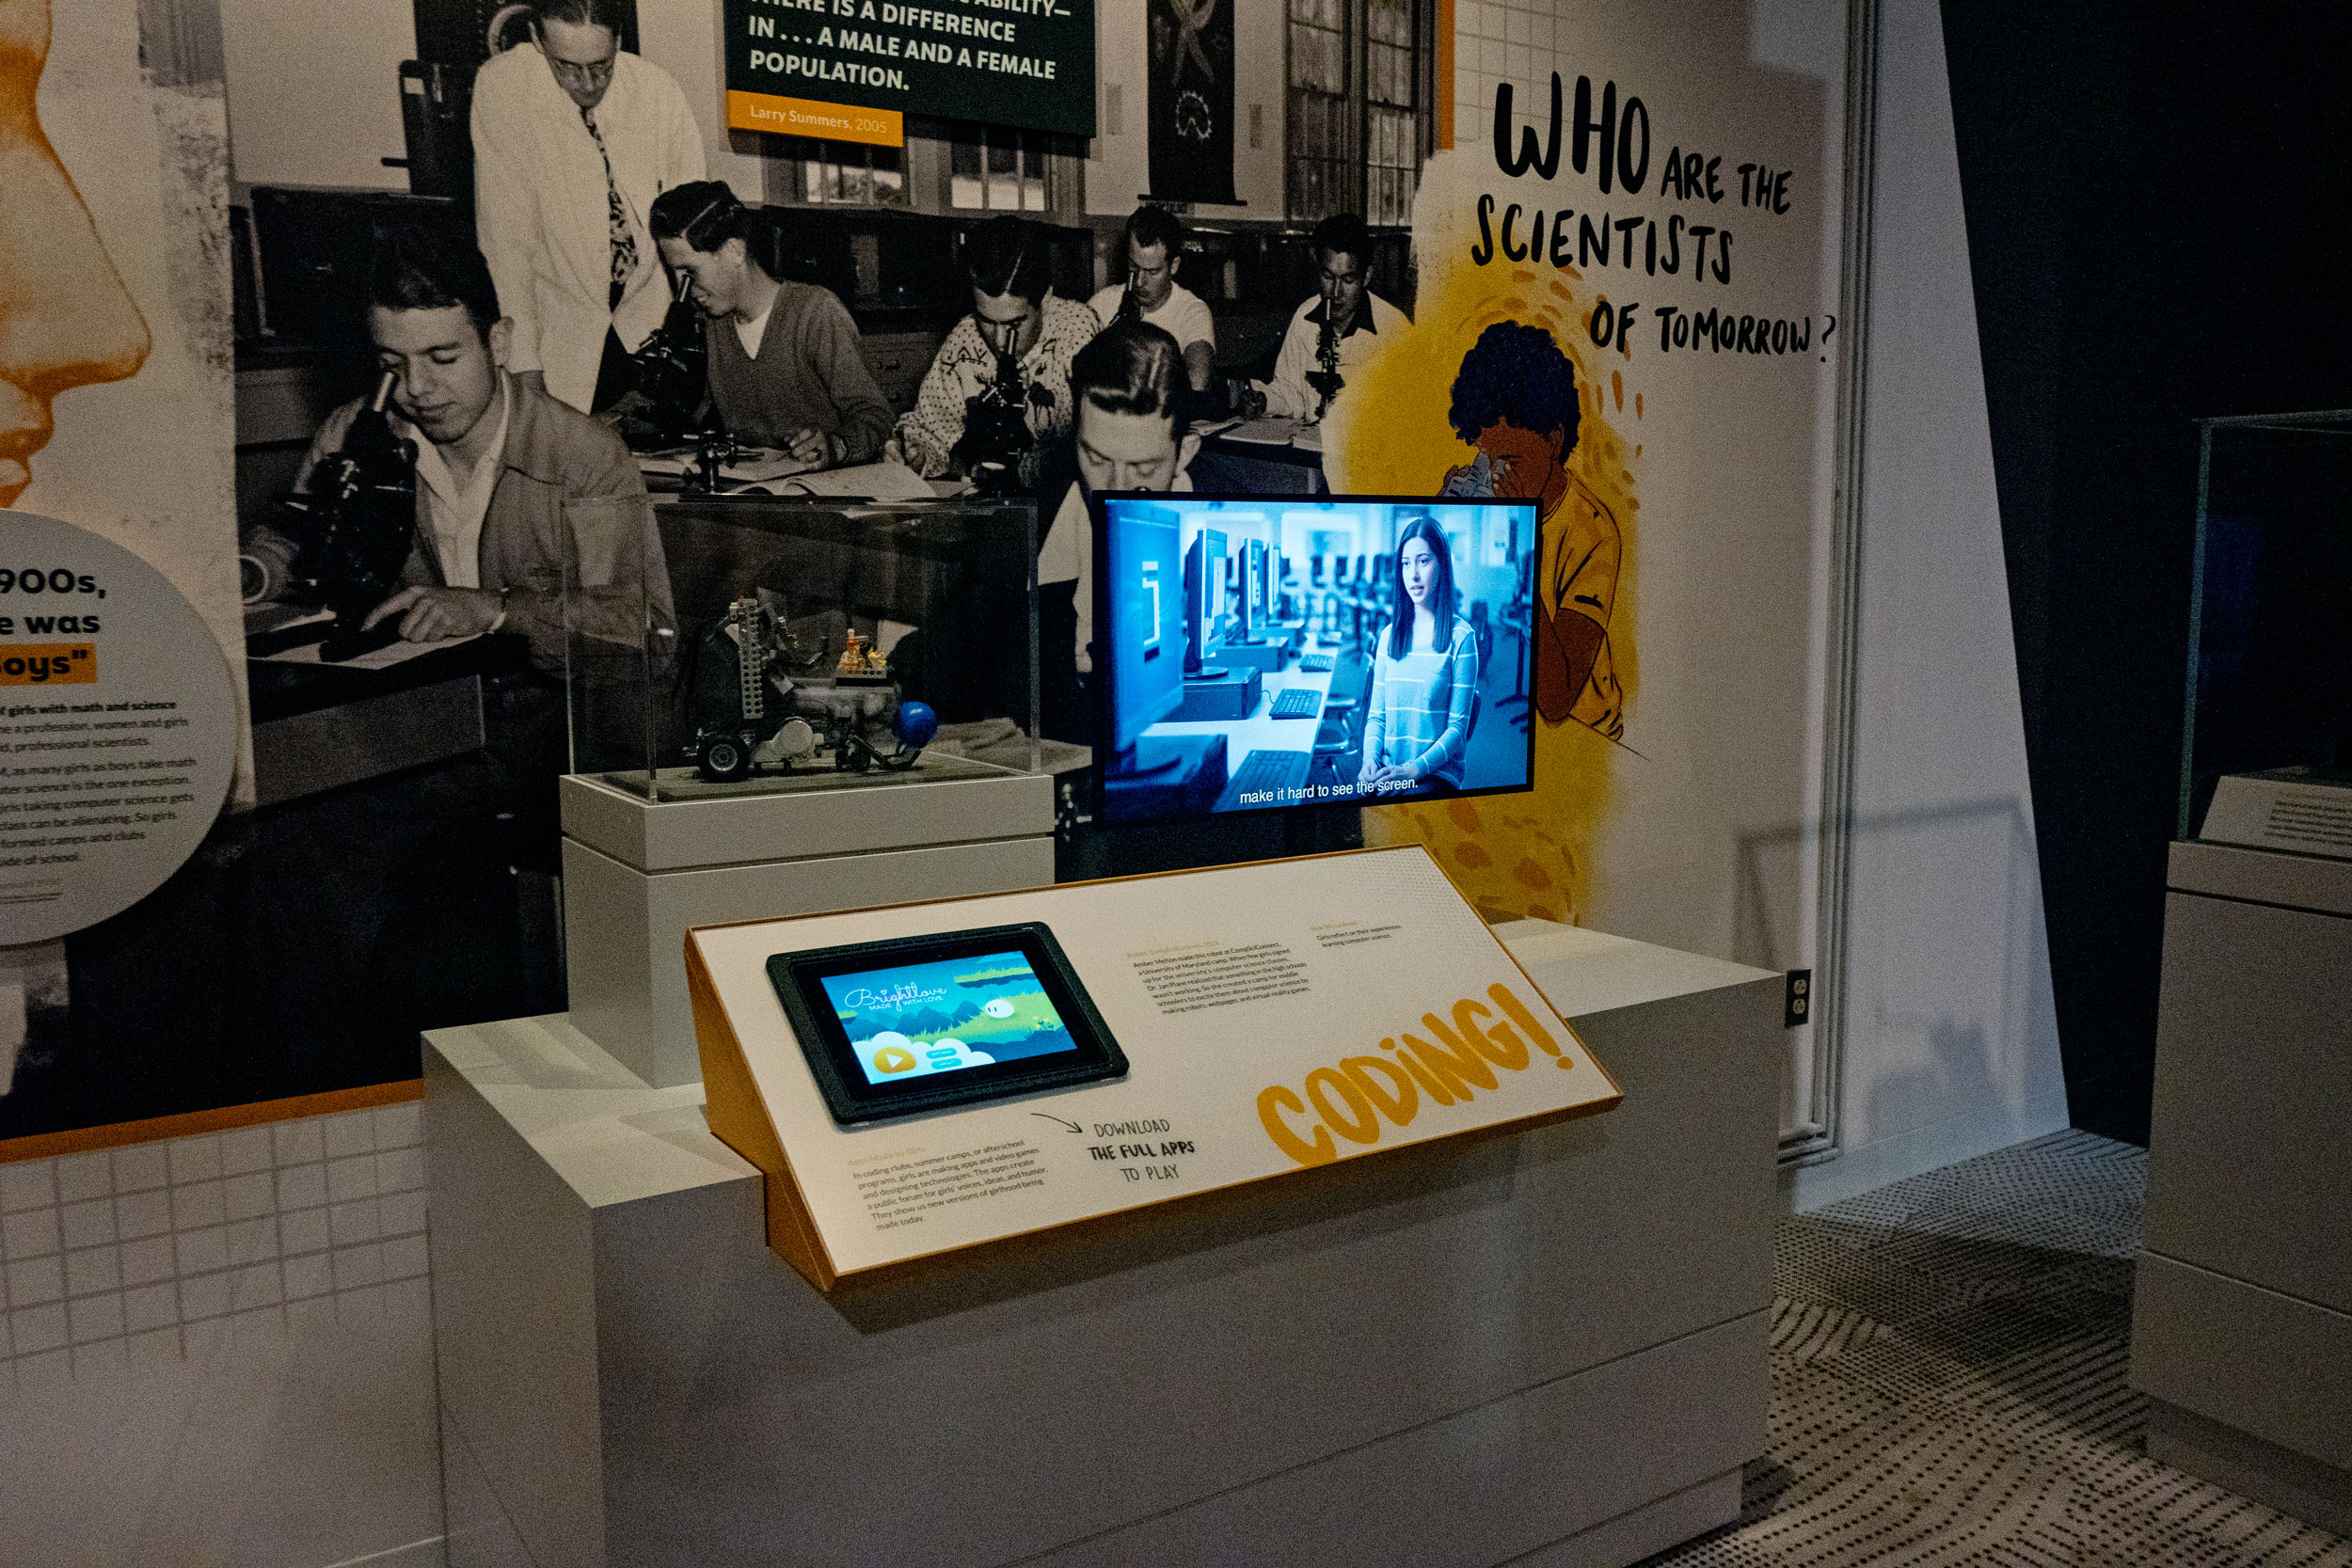 Brightlove on a tablet in the National Museum of American History